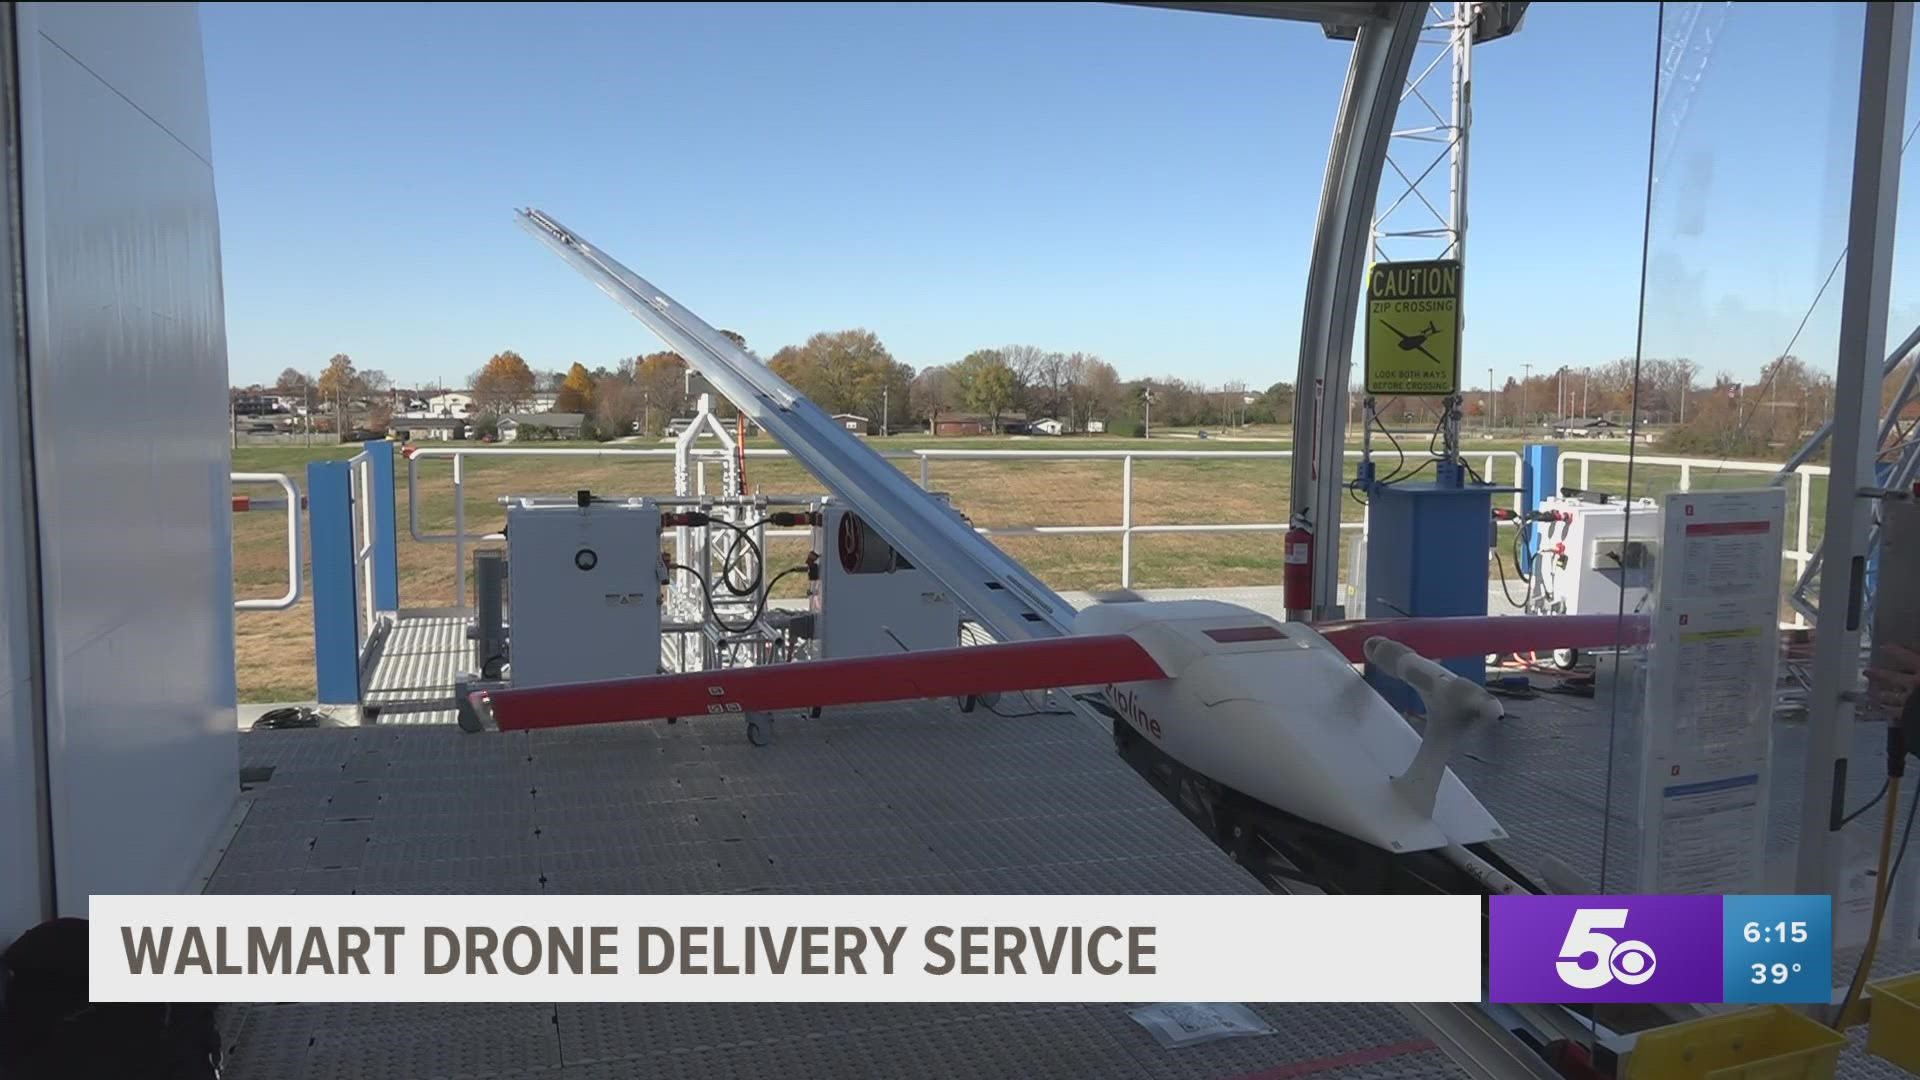 The company will be using drones to make on-demand deliveries of select health and wellness and consumable items.